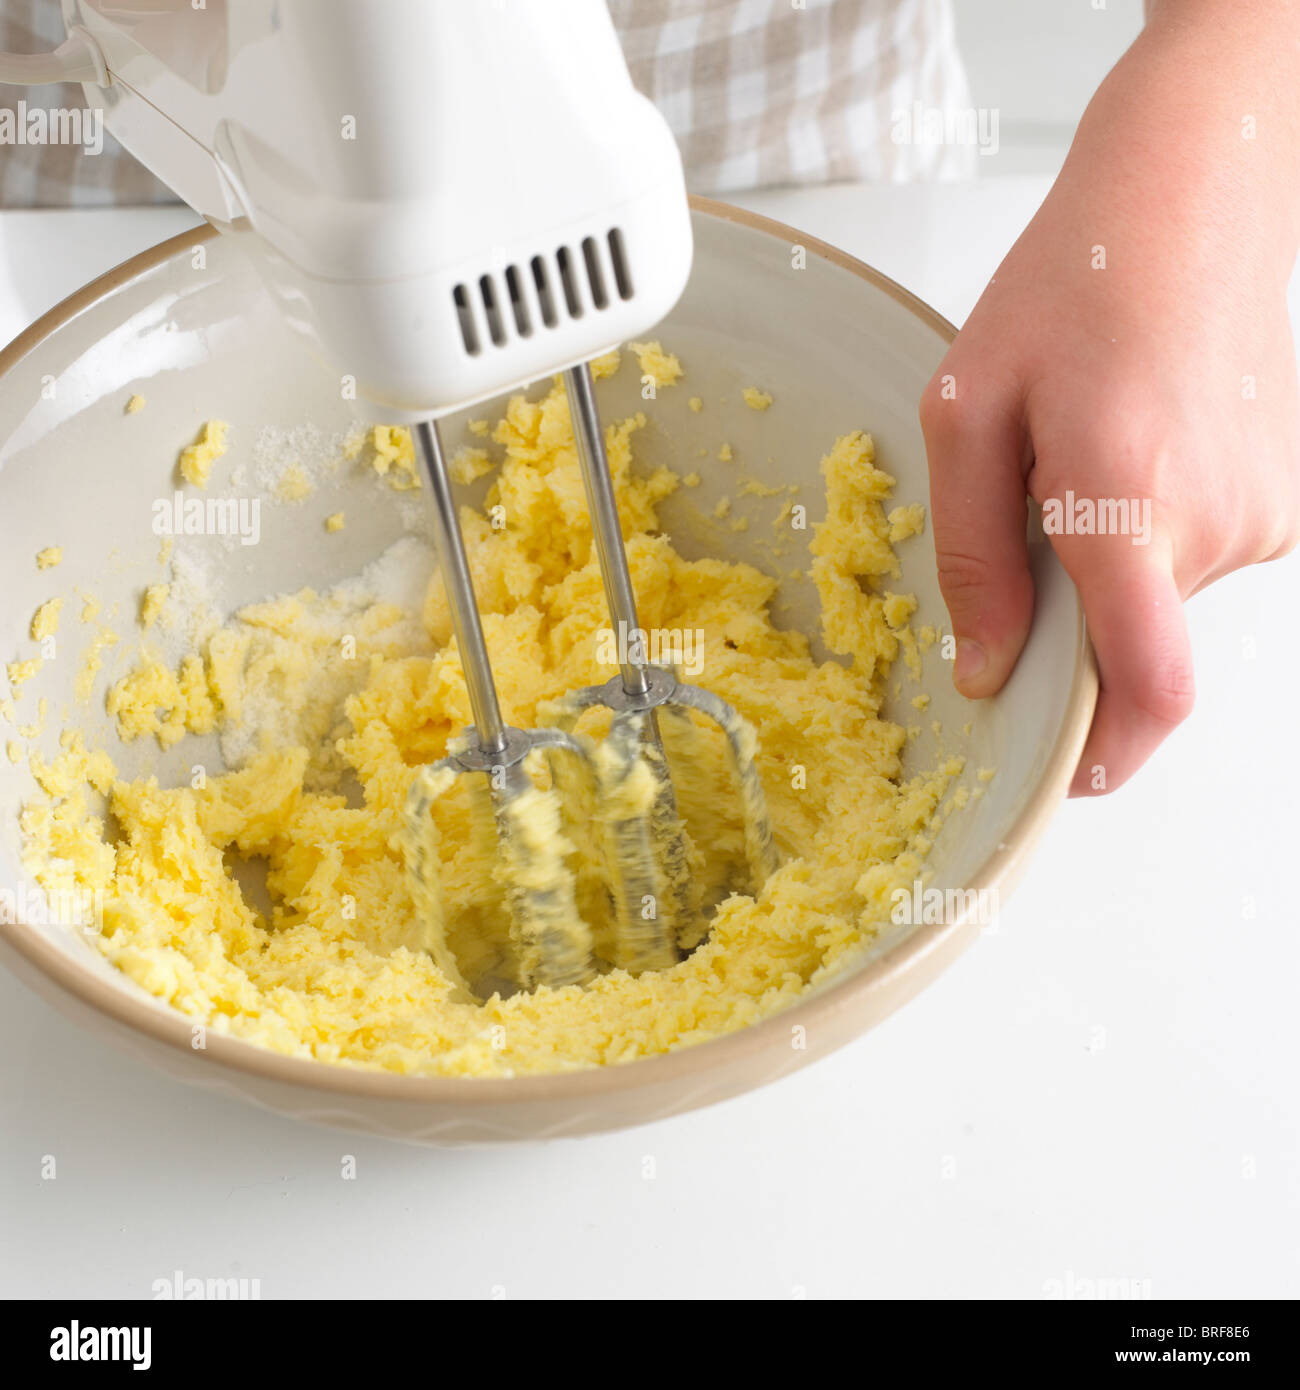 62,500+ Electric Mixer Stock Photos, Pictures & Royalty-Free